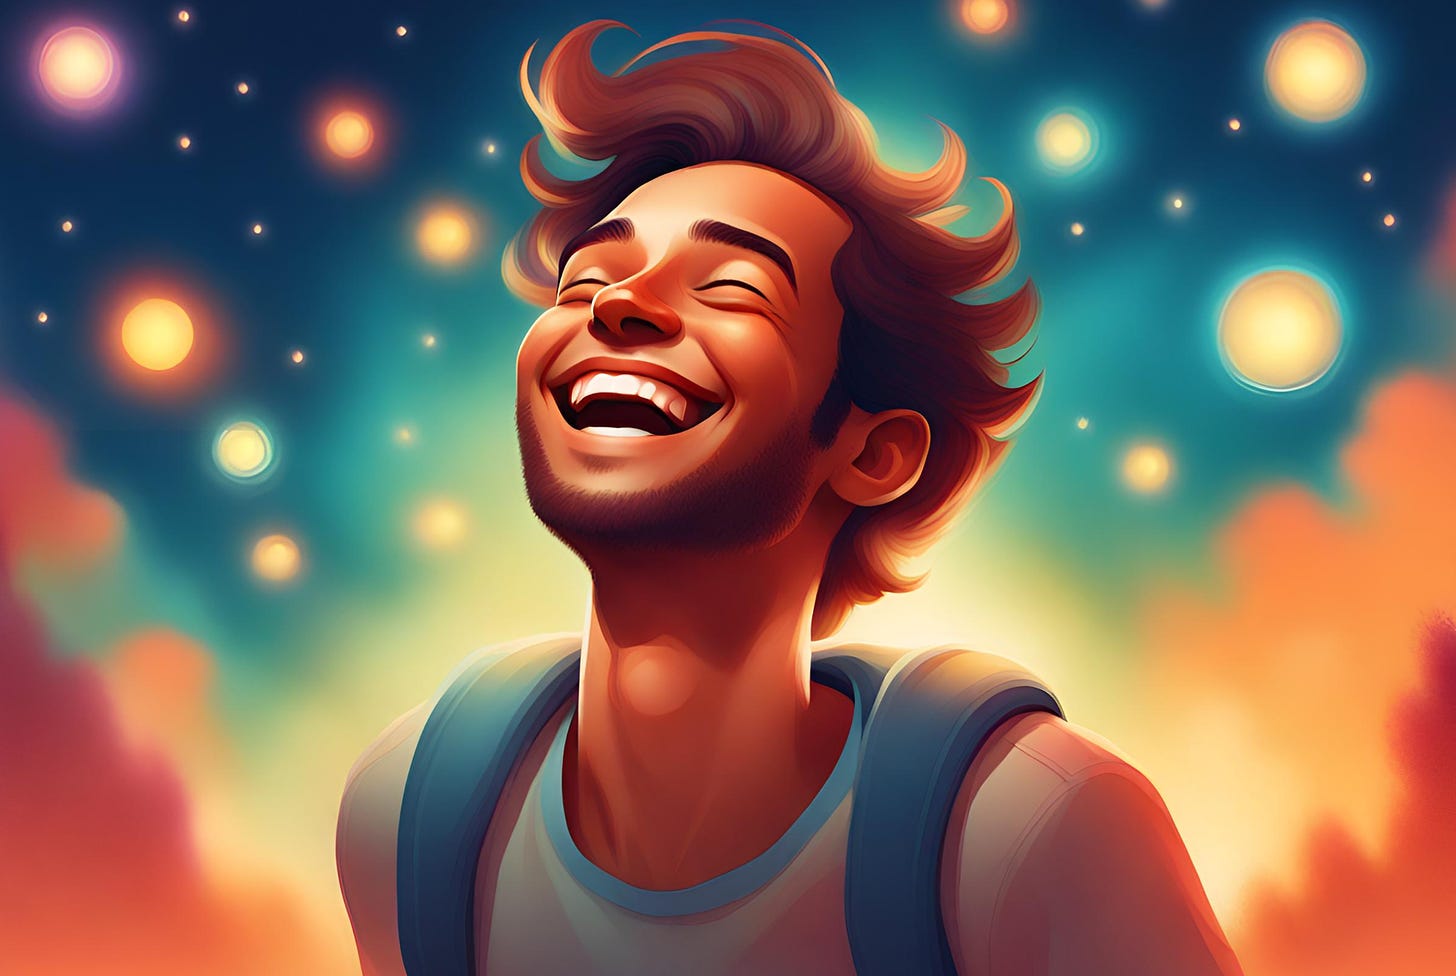 Illustration of a happy person smiling